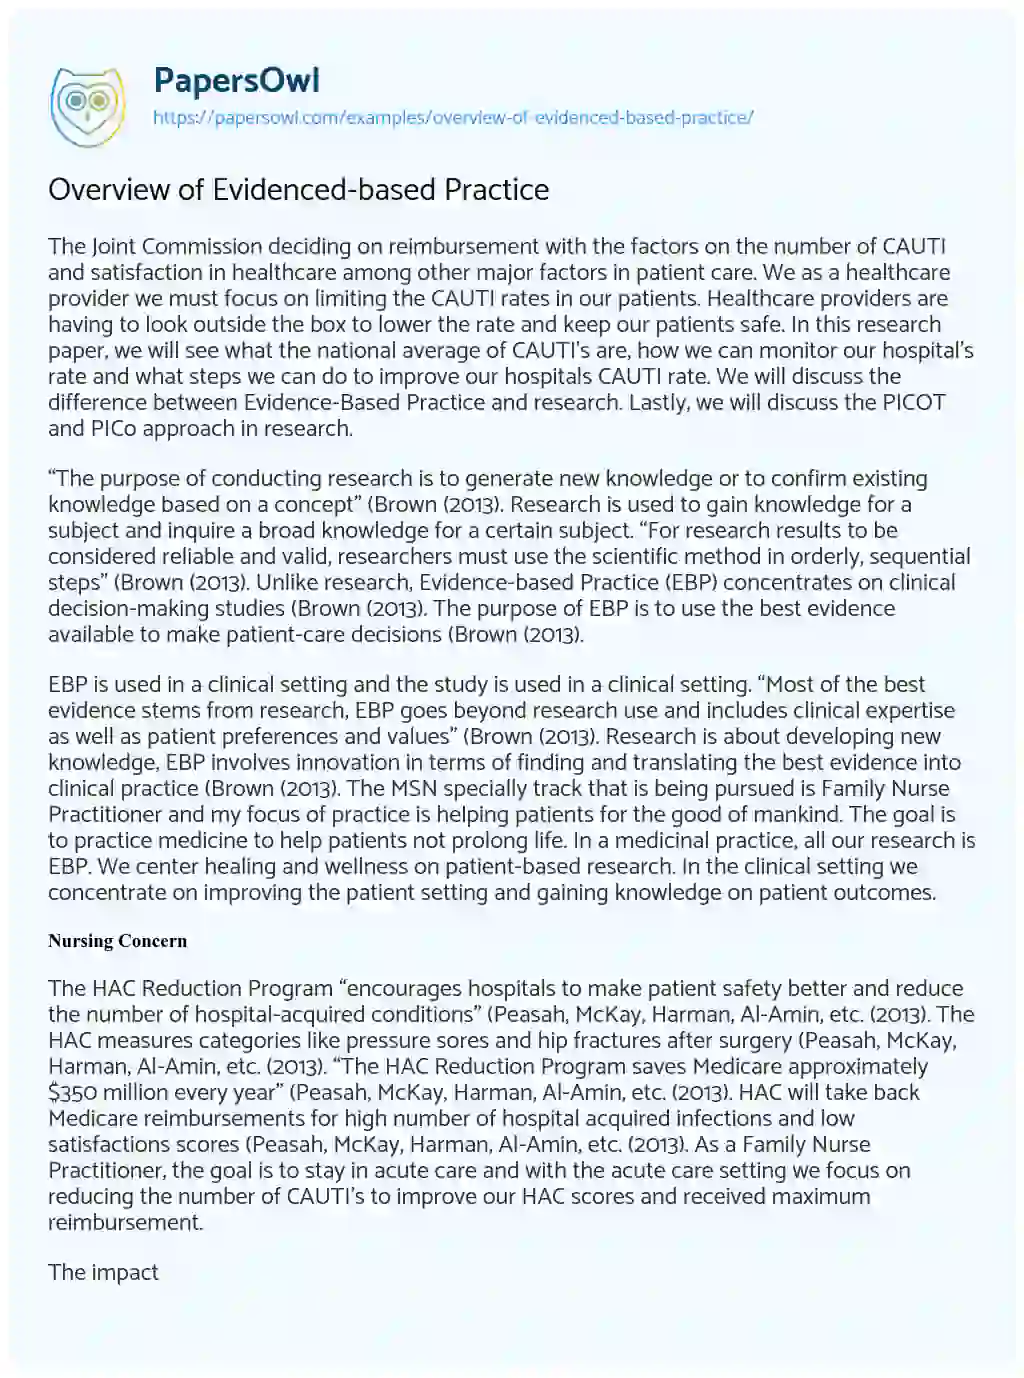 Essay on Overview of Evidenced-based Practice